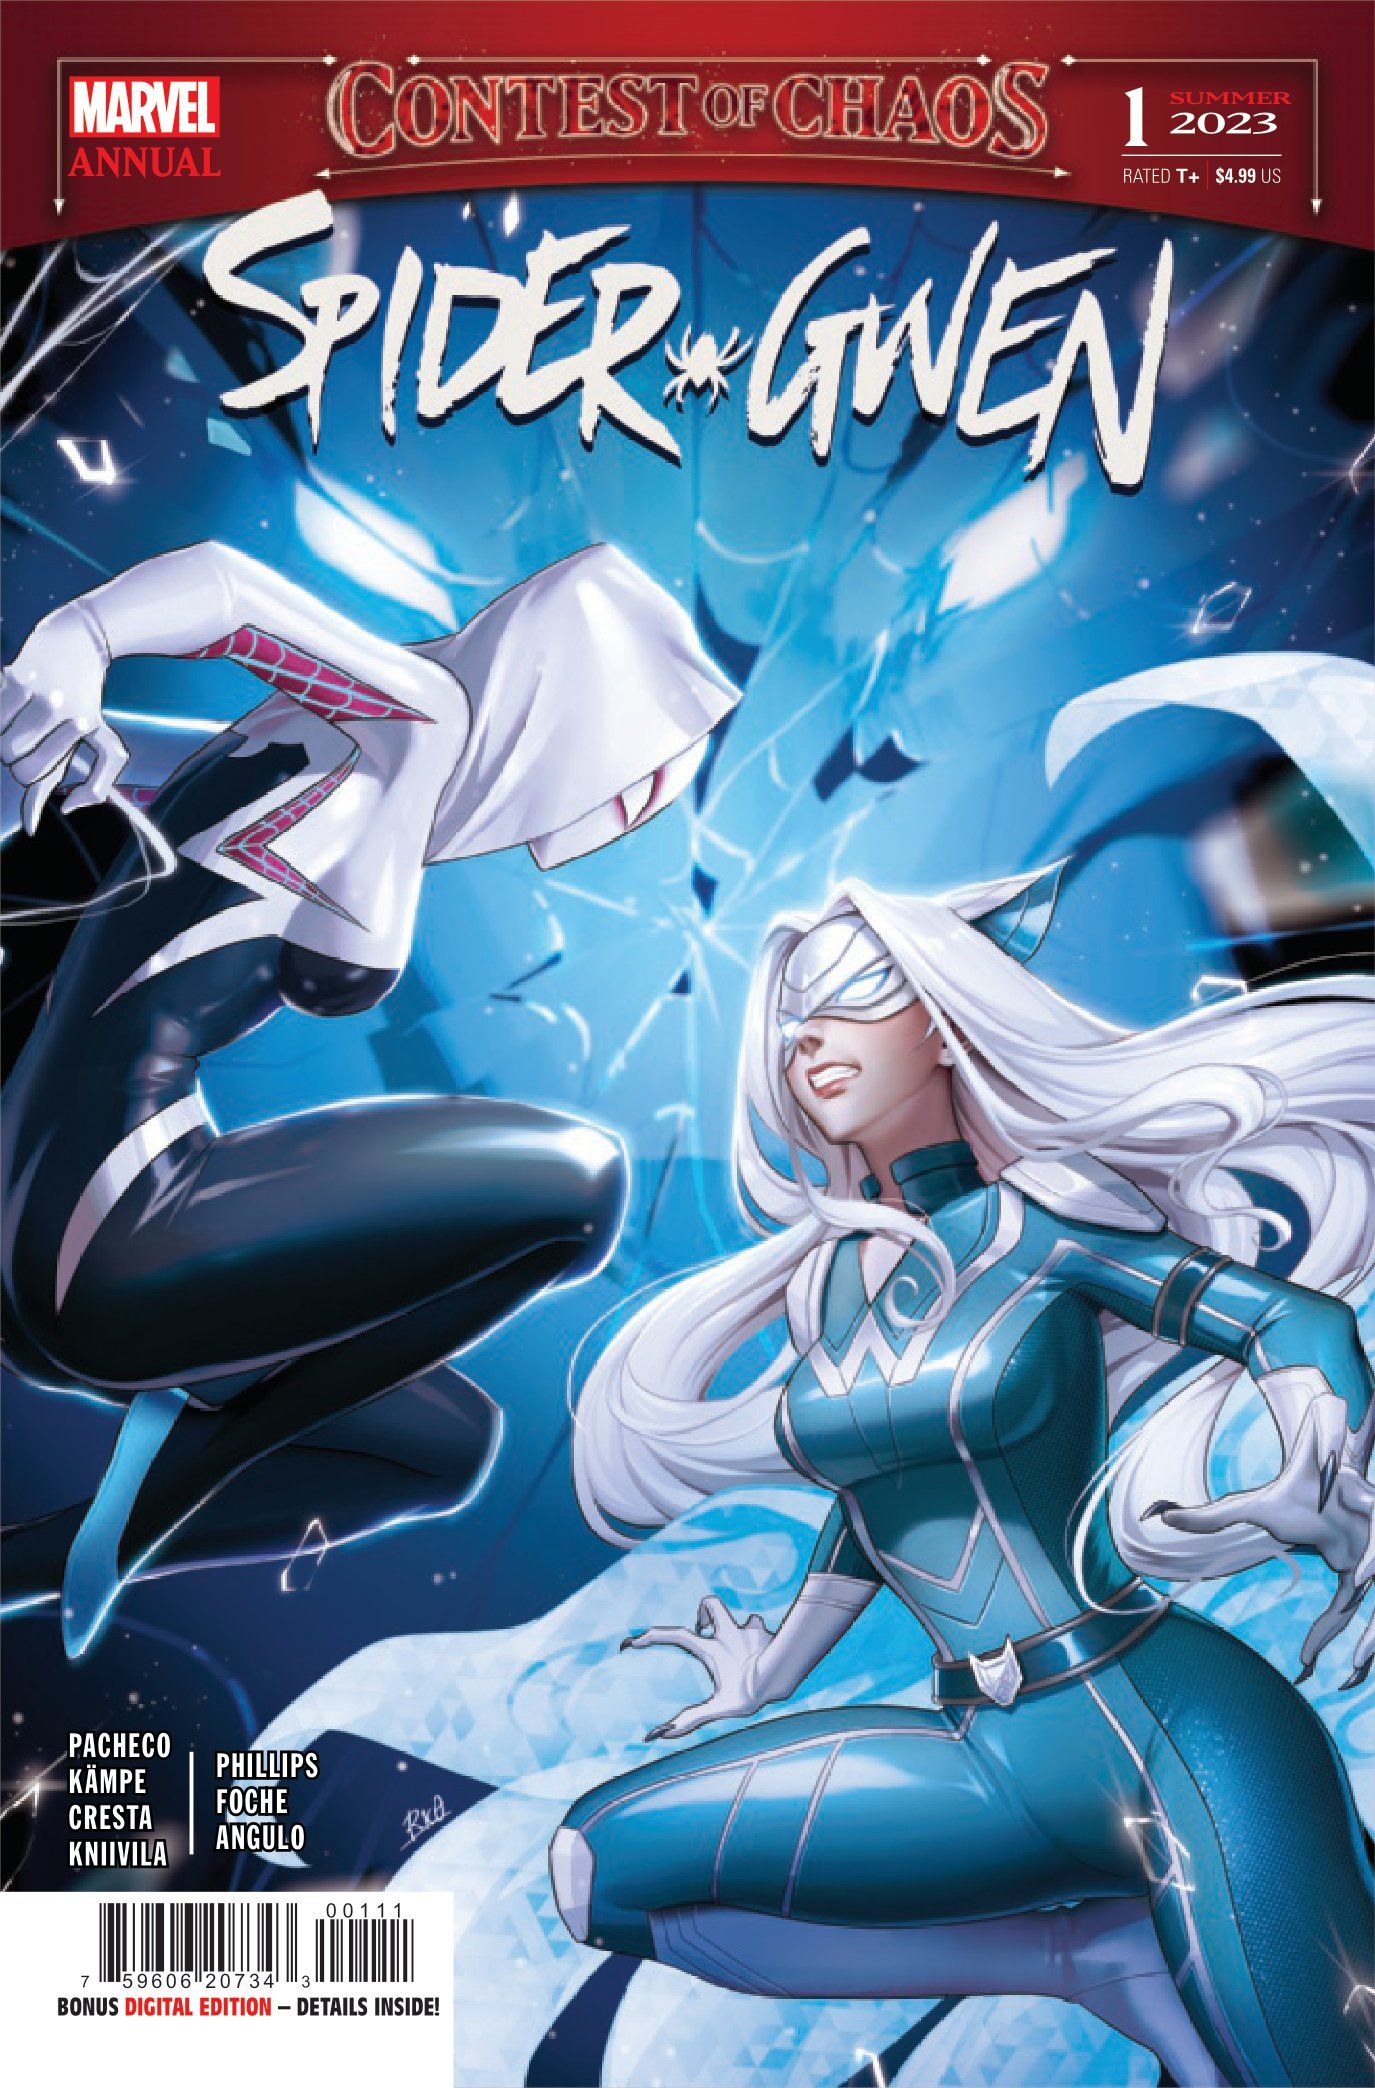 Spider-Gwen Annual #1 ACover by R1Co